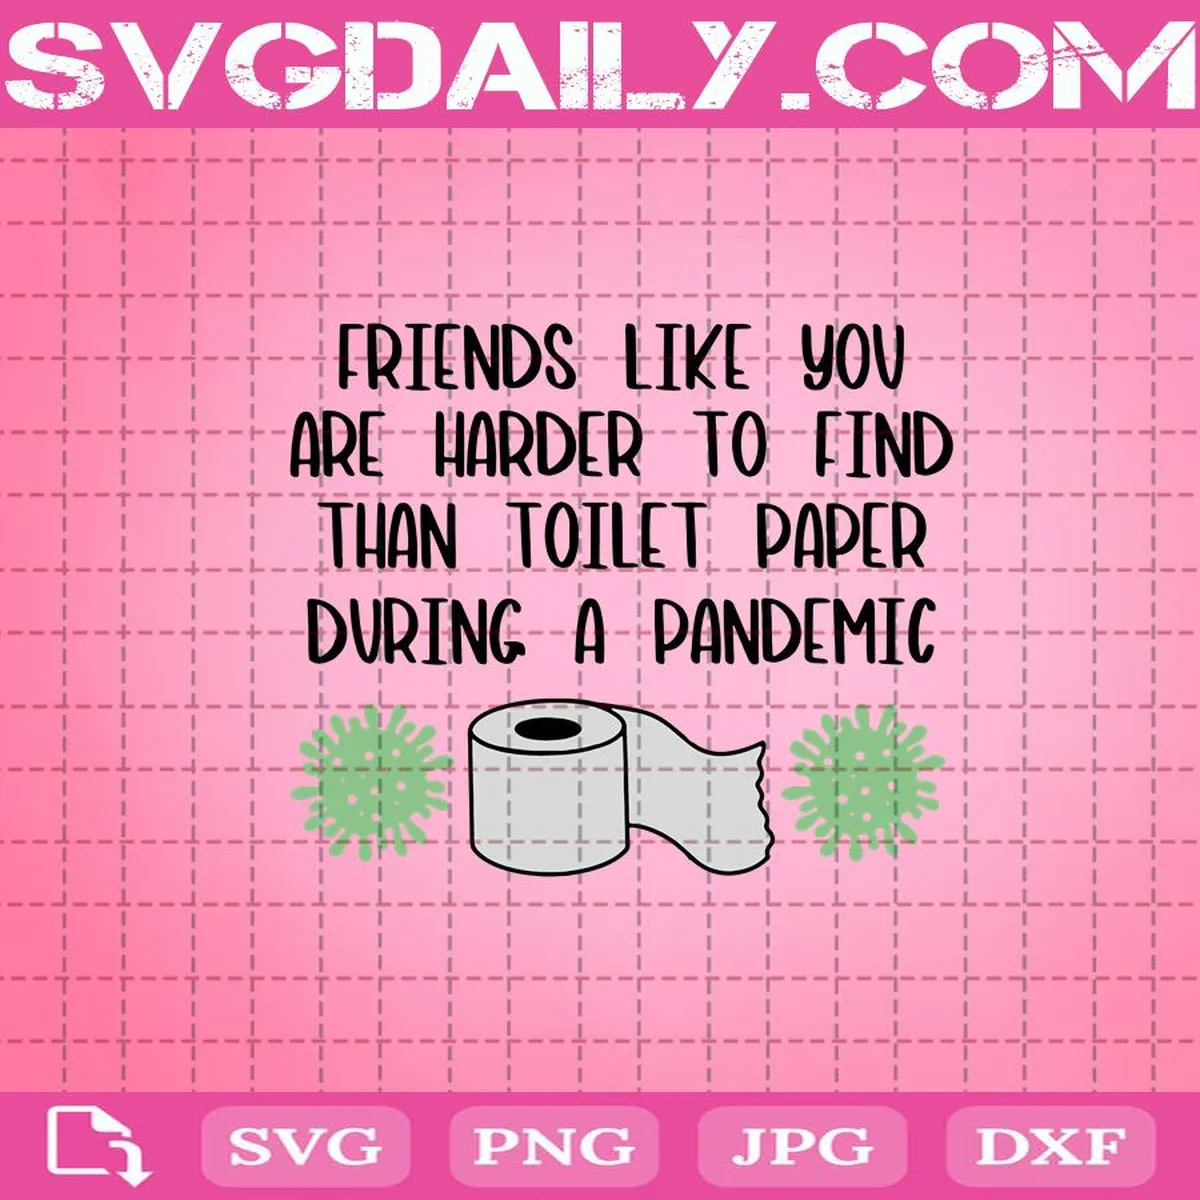 Fiends Like You Are Harder To Find Than Toilet Paper During A Pandemic Svg Daily Free Premium